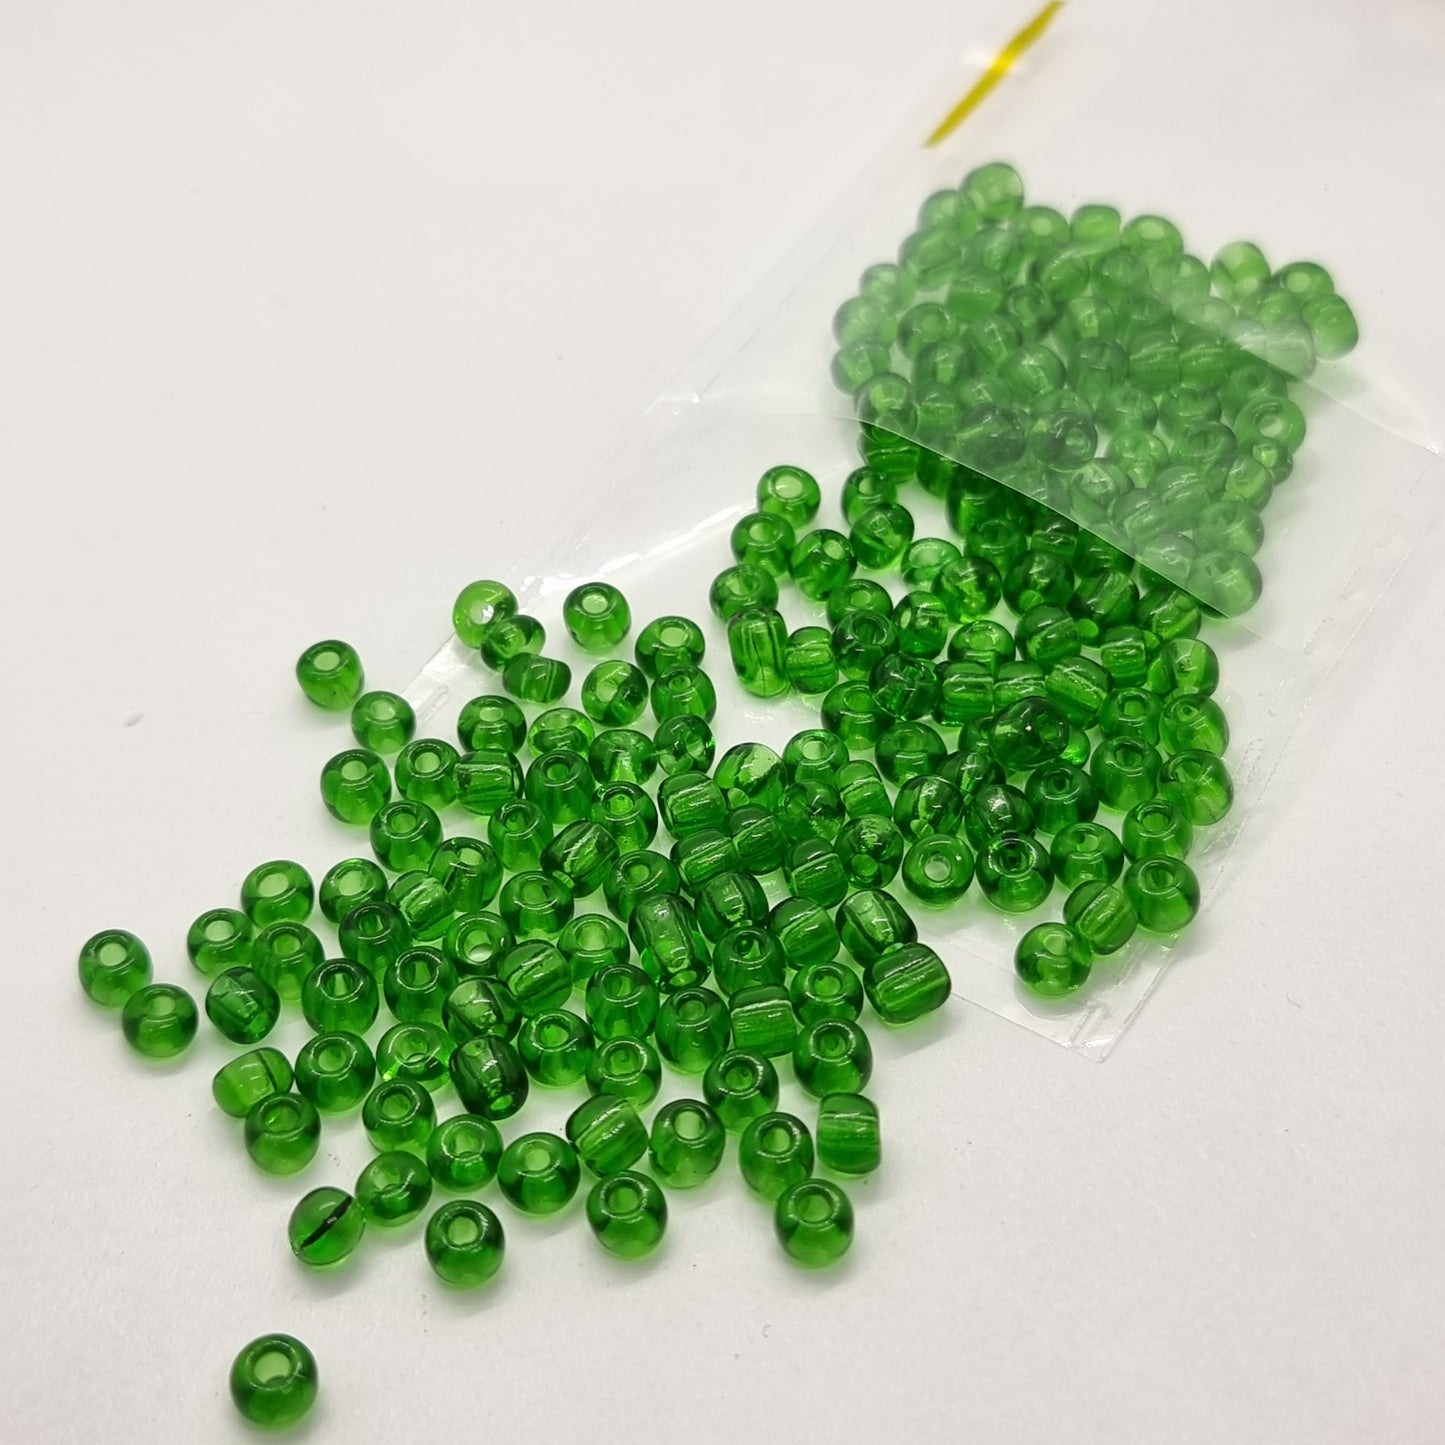 15g 3mm Green Transparent Seed Beads